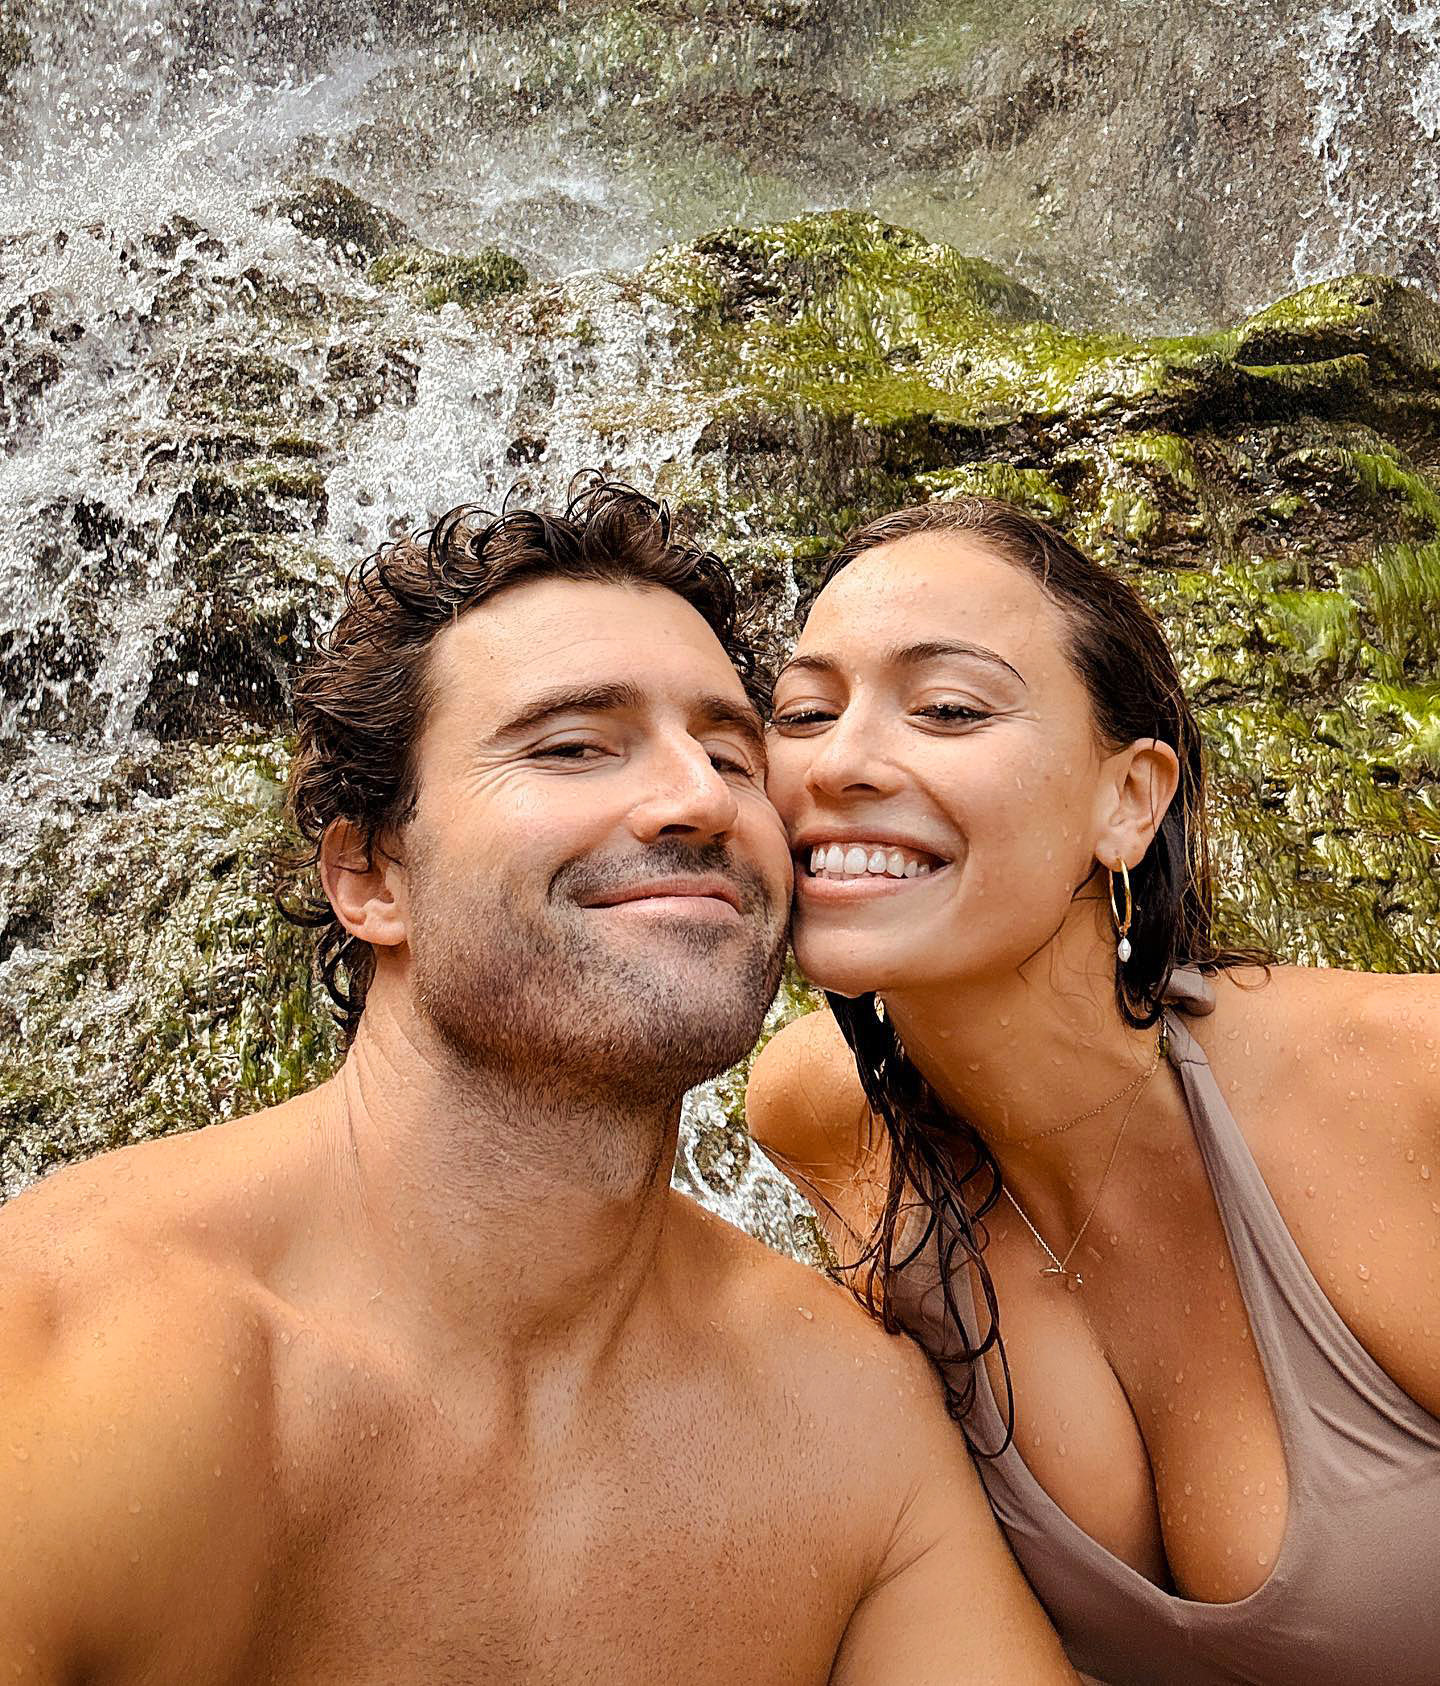 Brody Jenner and Pregnant Girlfriend Tia Blanco’s Relationship Timeline - 611